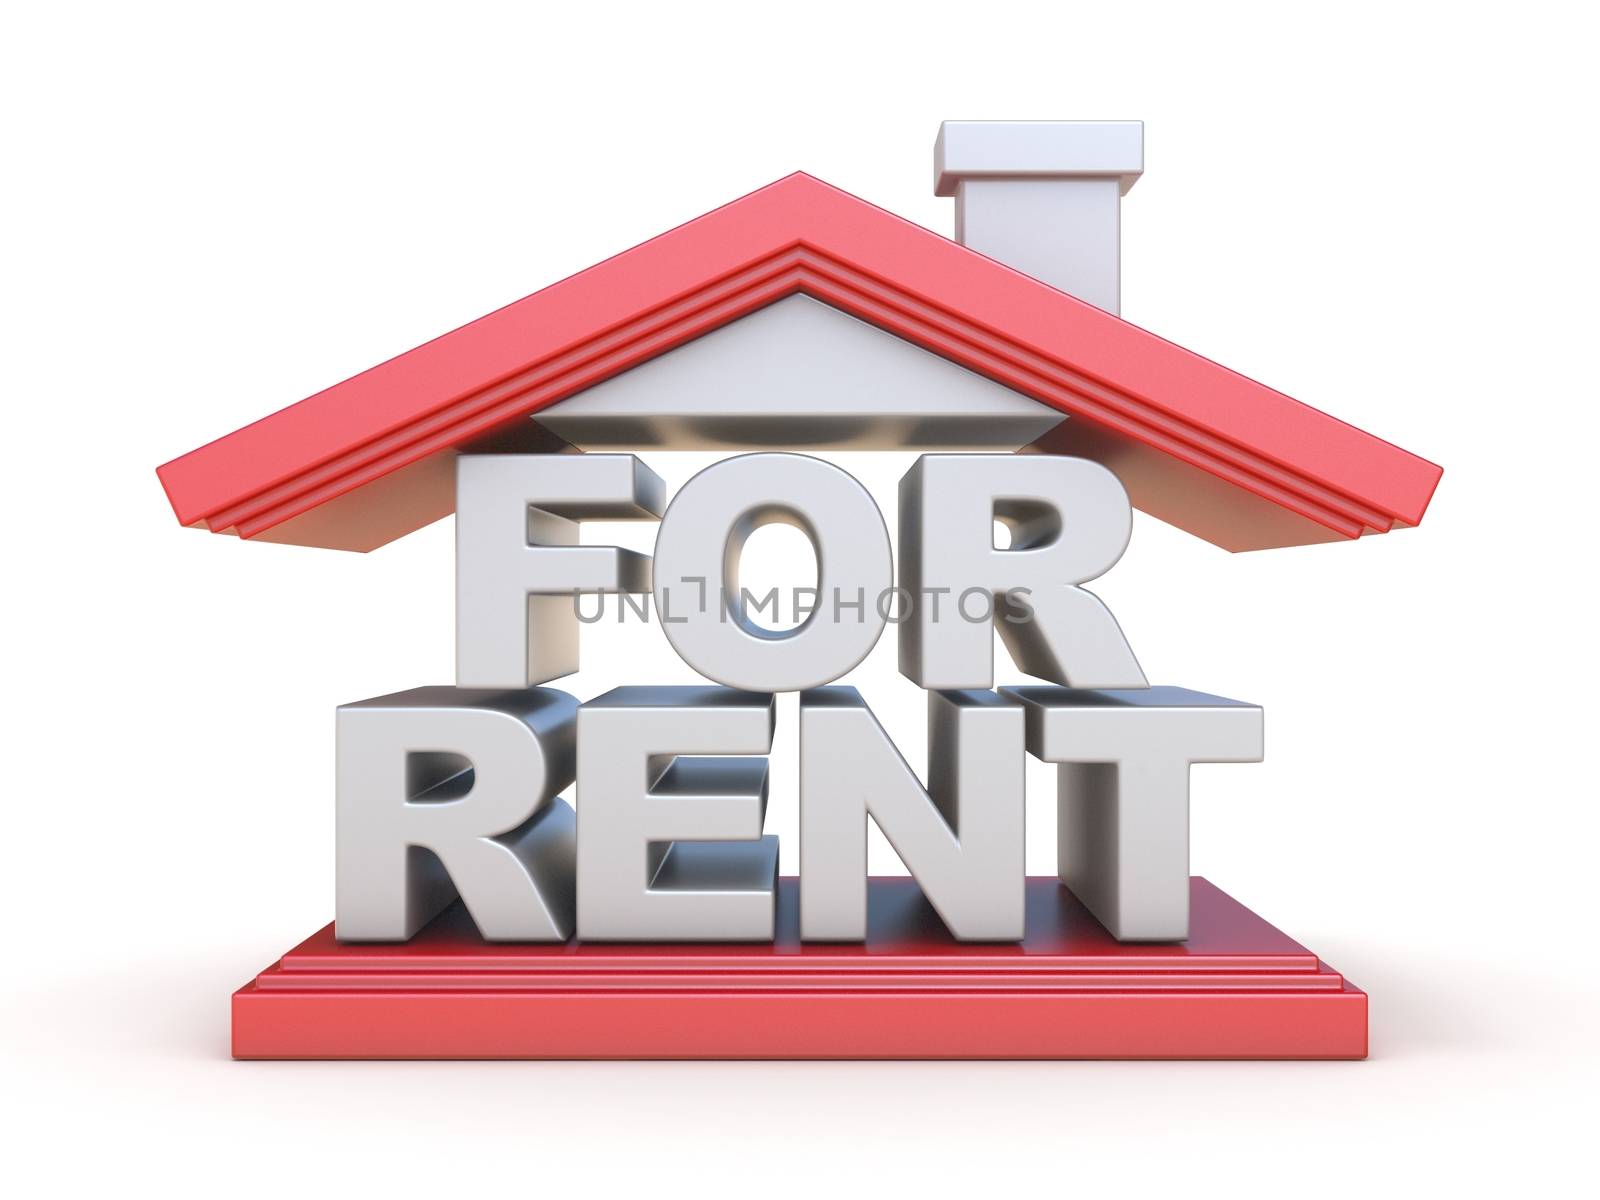 FOR RENT house sign front view 3D render illustration isolated on white background